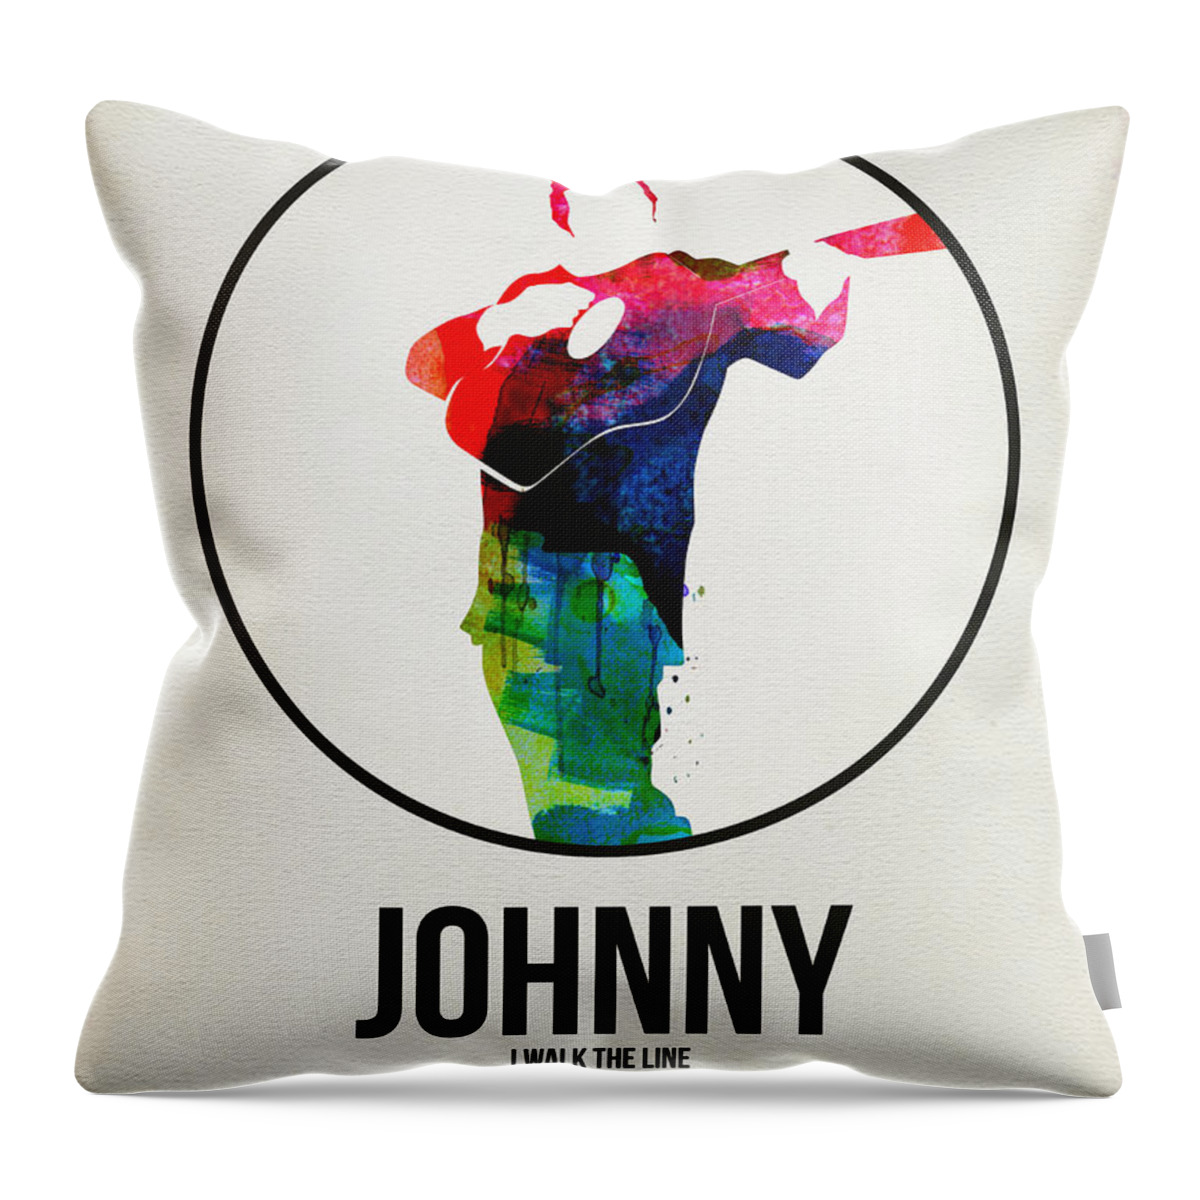 Johnny Cash Throw Pillow featuring the digital art Johnny Cash Watercolor by Naxart Studio